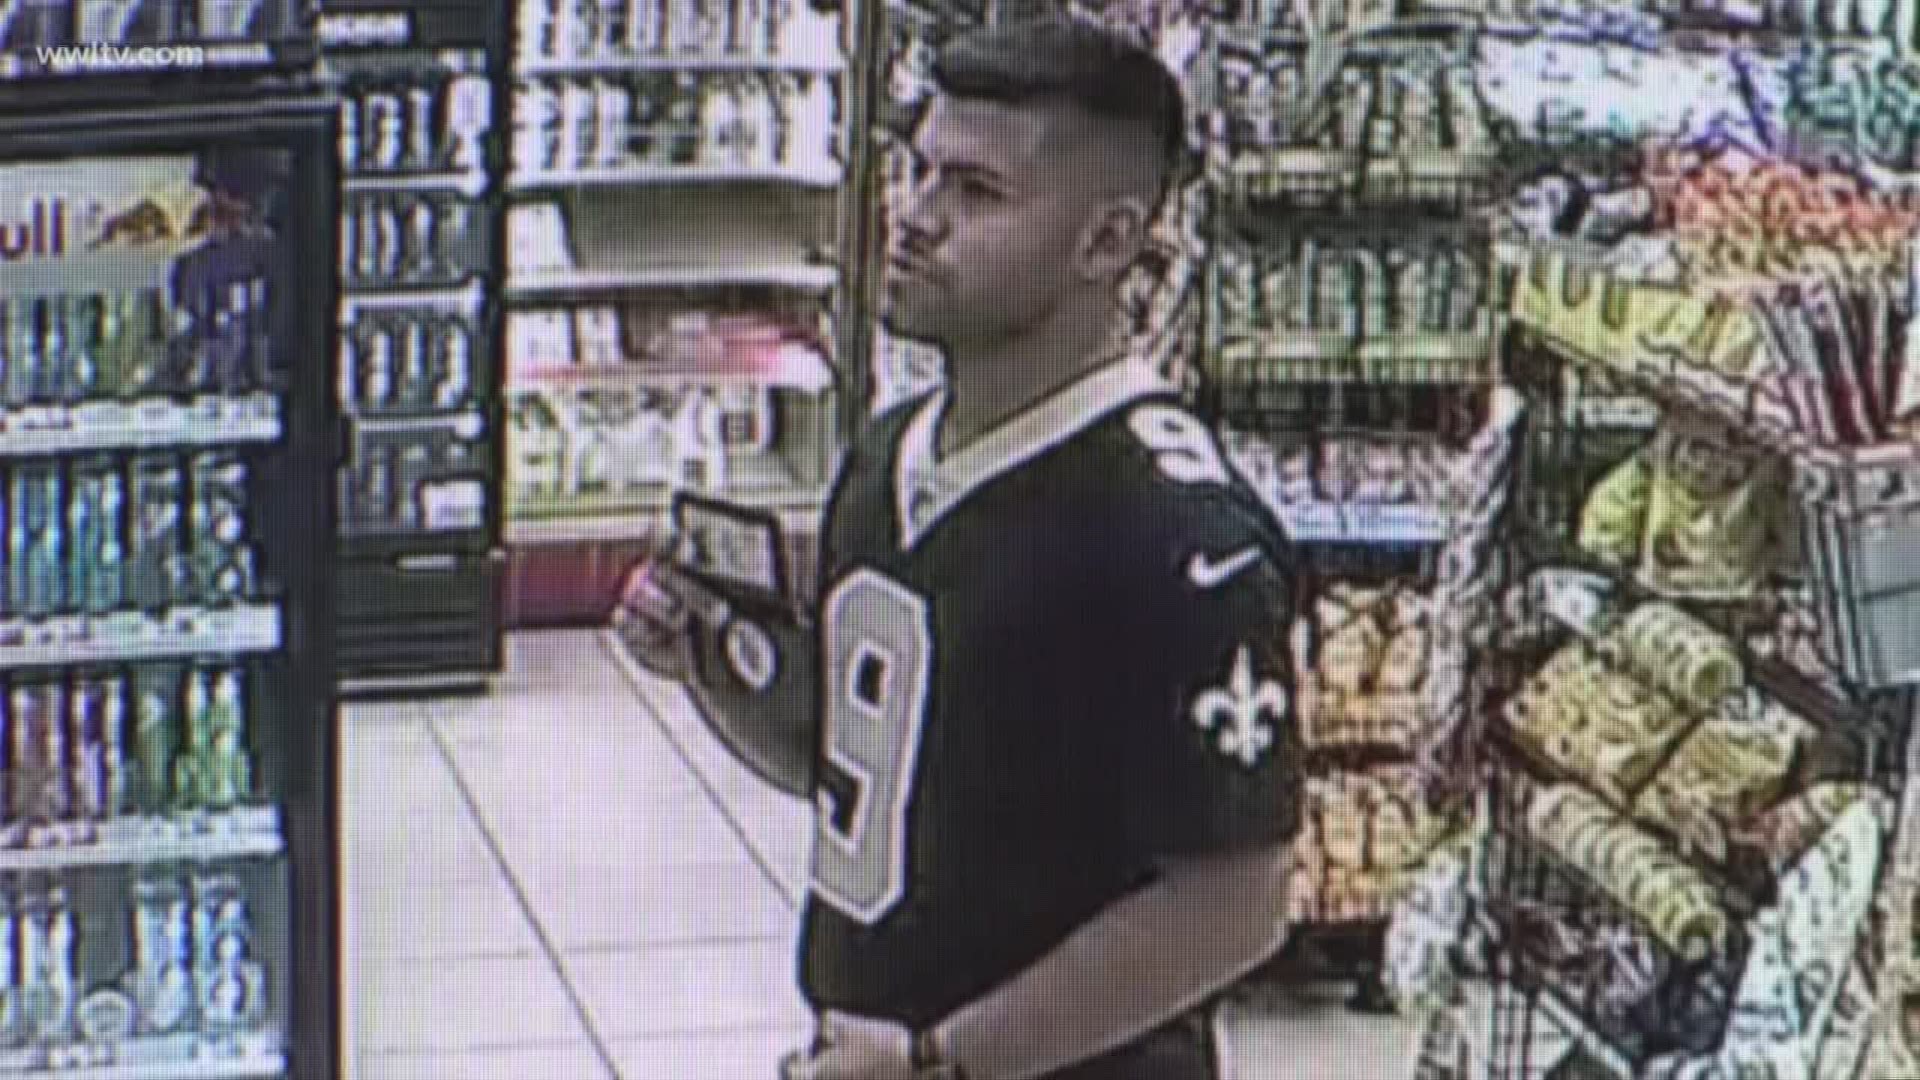 Investigators on the Northshore are searching for a man who allegedly created a disturbance at a gas station convenience store Sunday night, then pulled out some sort of badge after store employees confronted him, according to Karole Miller, a Mandeville police officer.